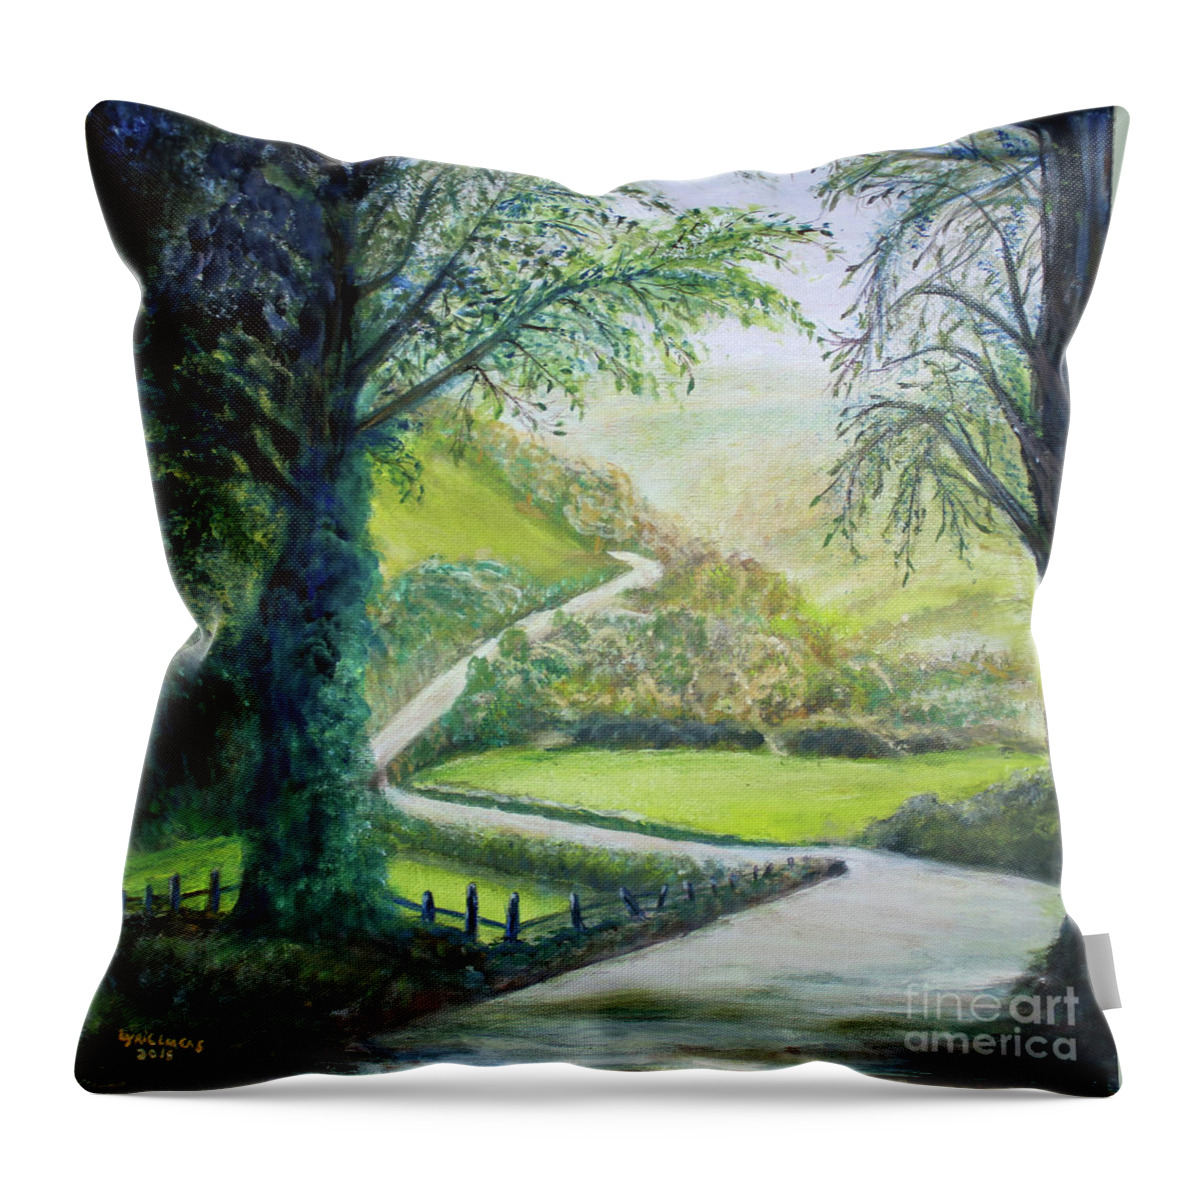 Landscape Throw Pillow featuring the painting Road To Tranquility by Lyric Lucas